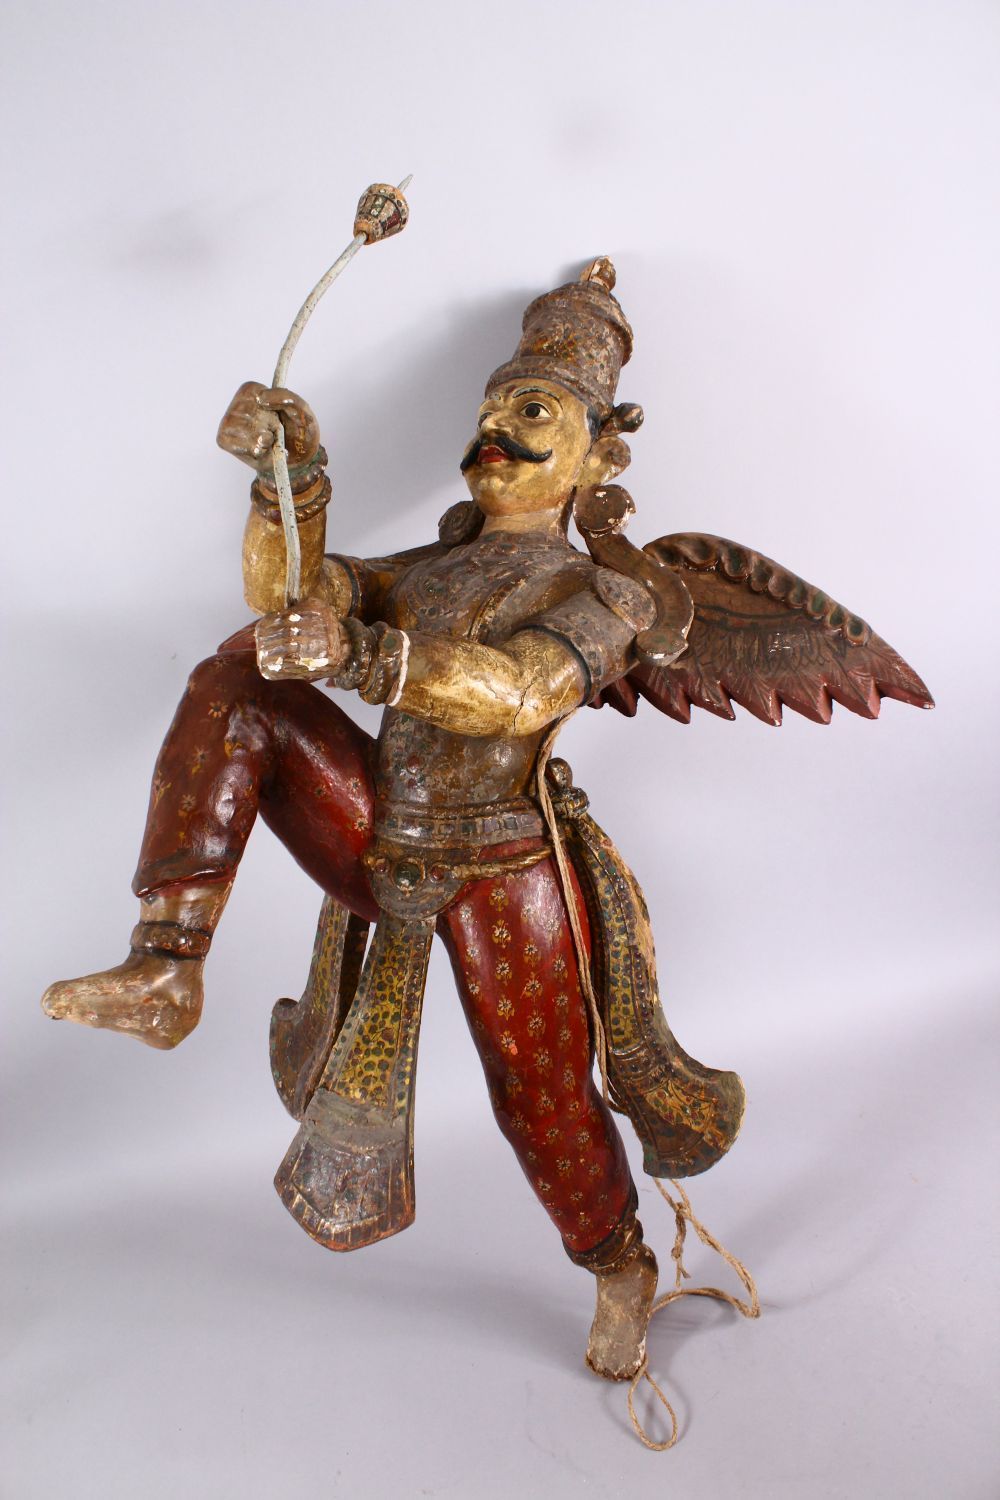 A 19TH CENTURY INDIAN / BURMESE CARVED WOOD FIGURE OF A WINGED GOD, stood holding an implement, with - Image 4 of 5